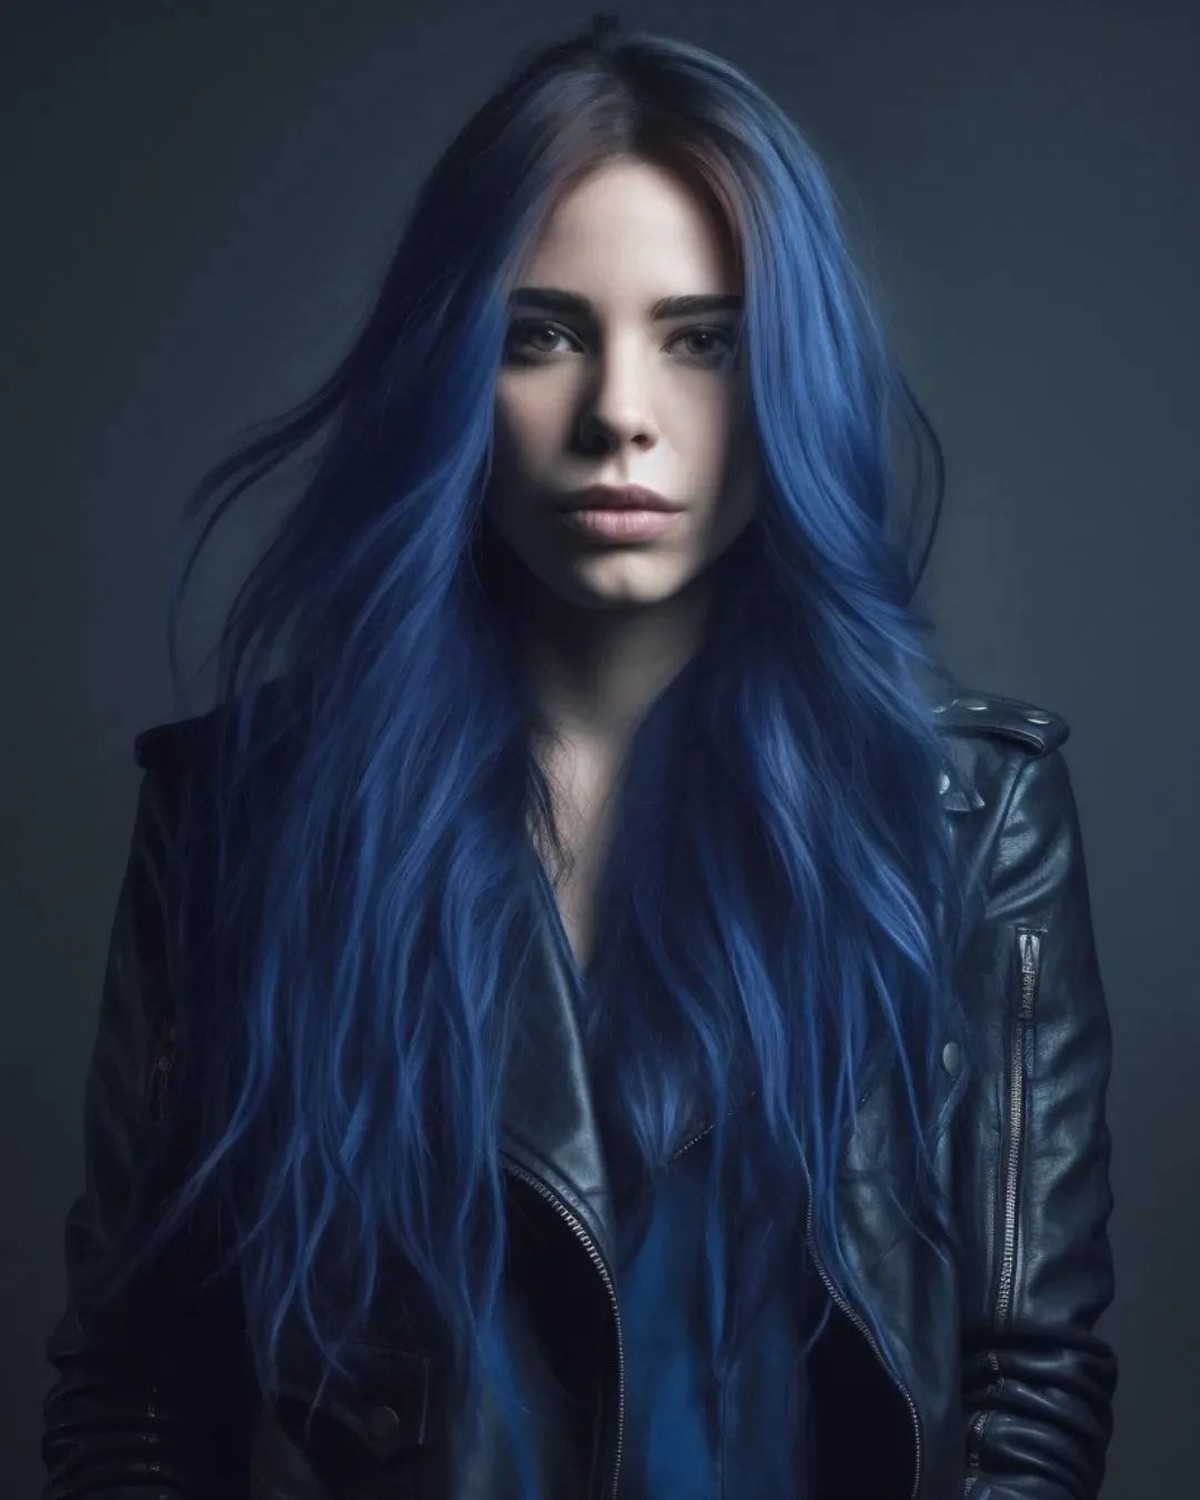 A girl with her dyed blue hair